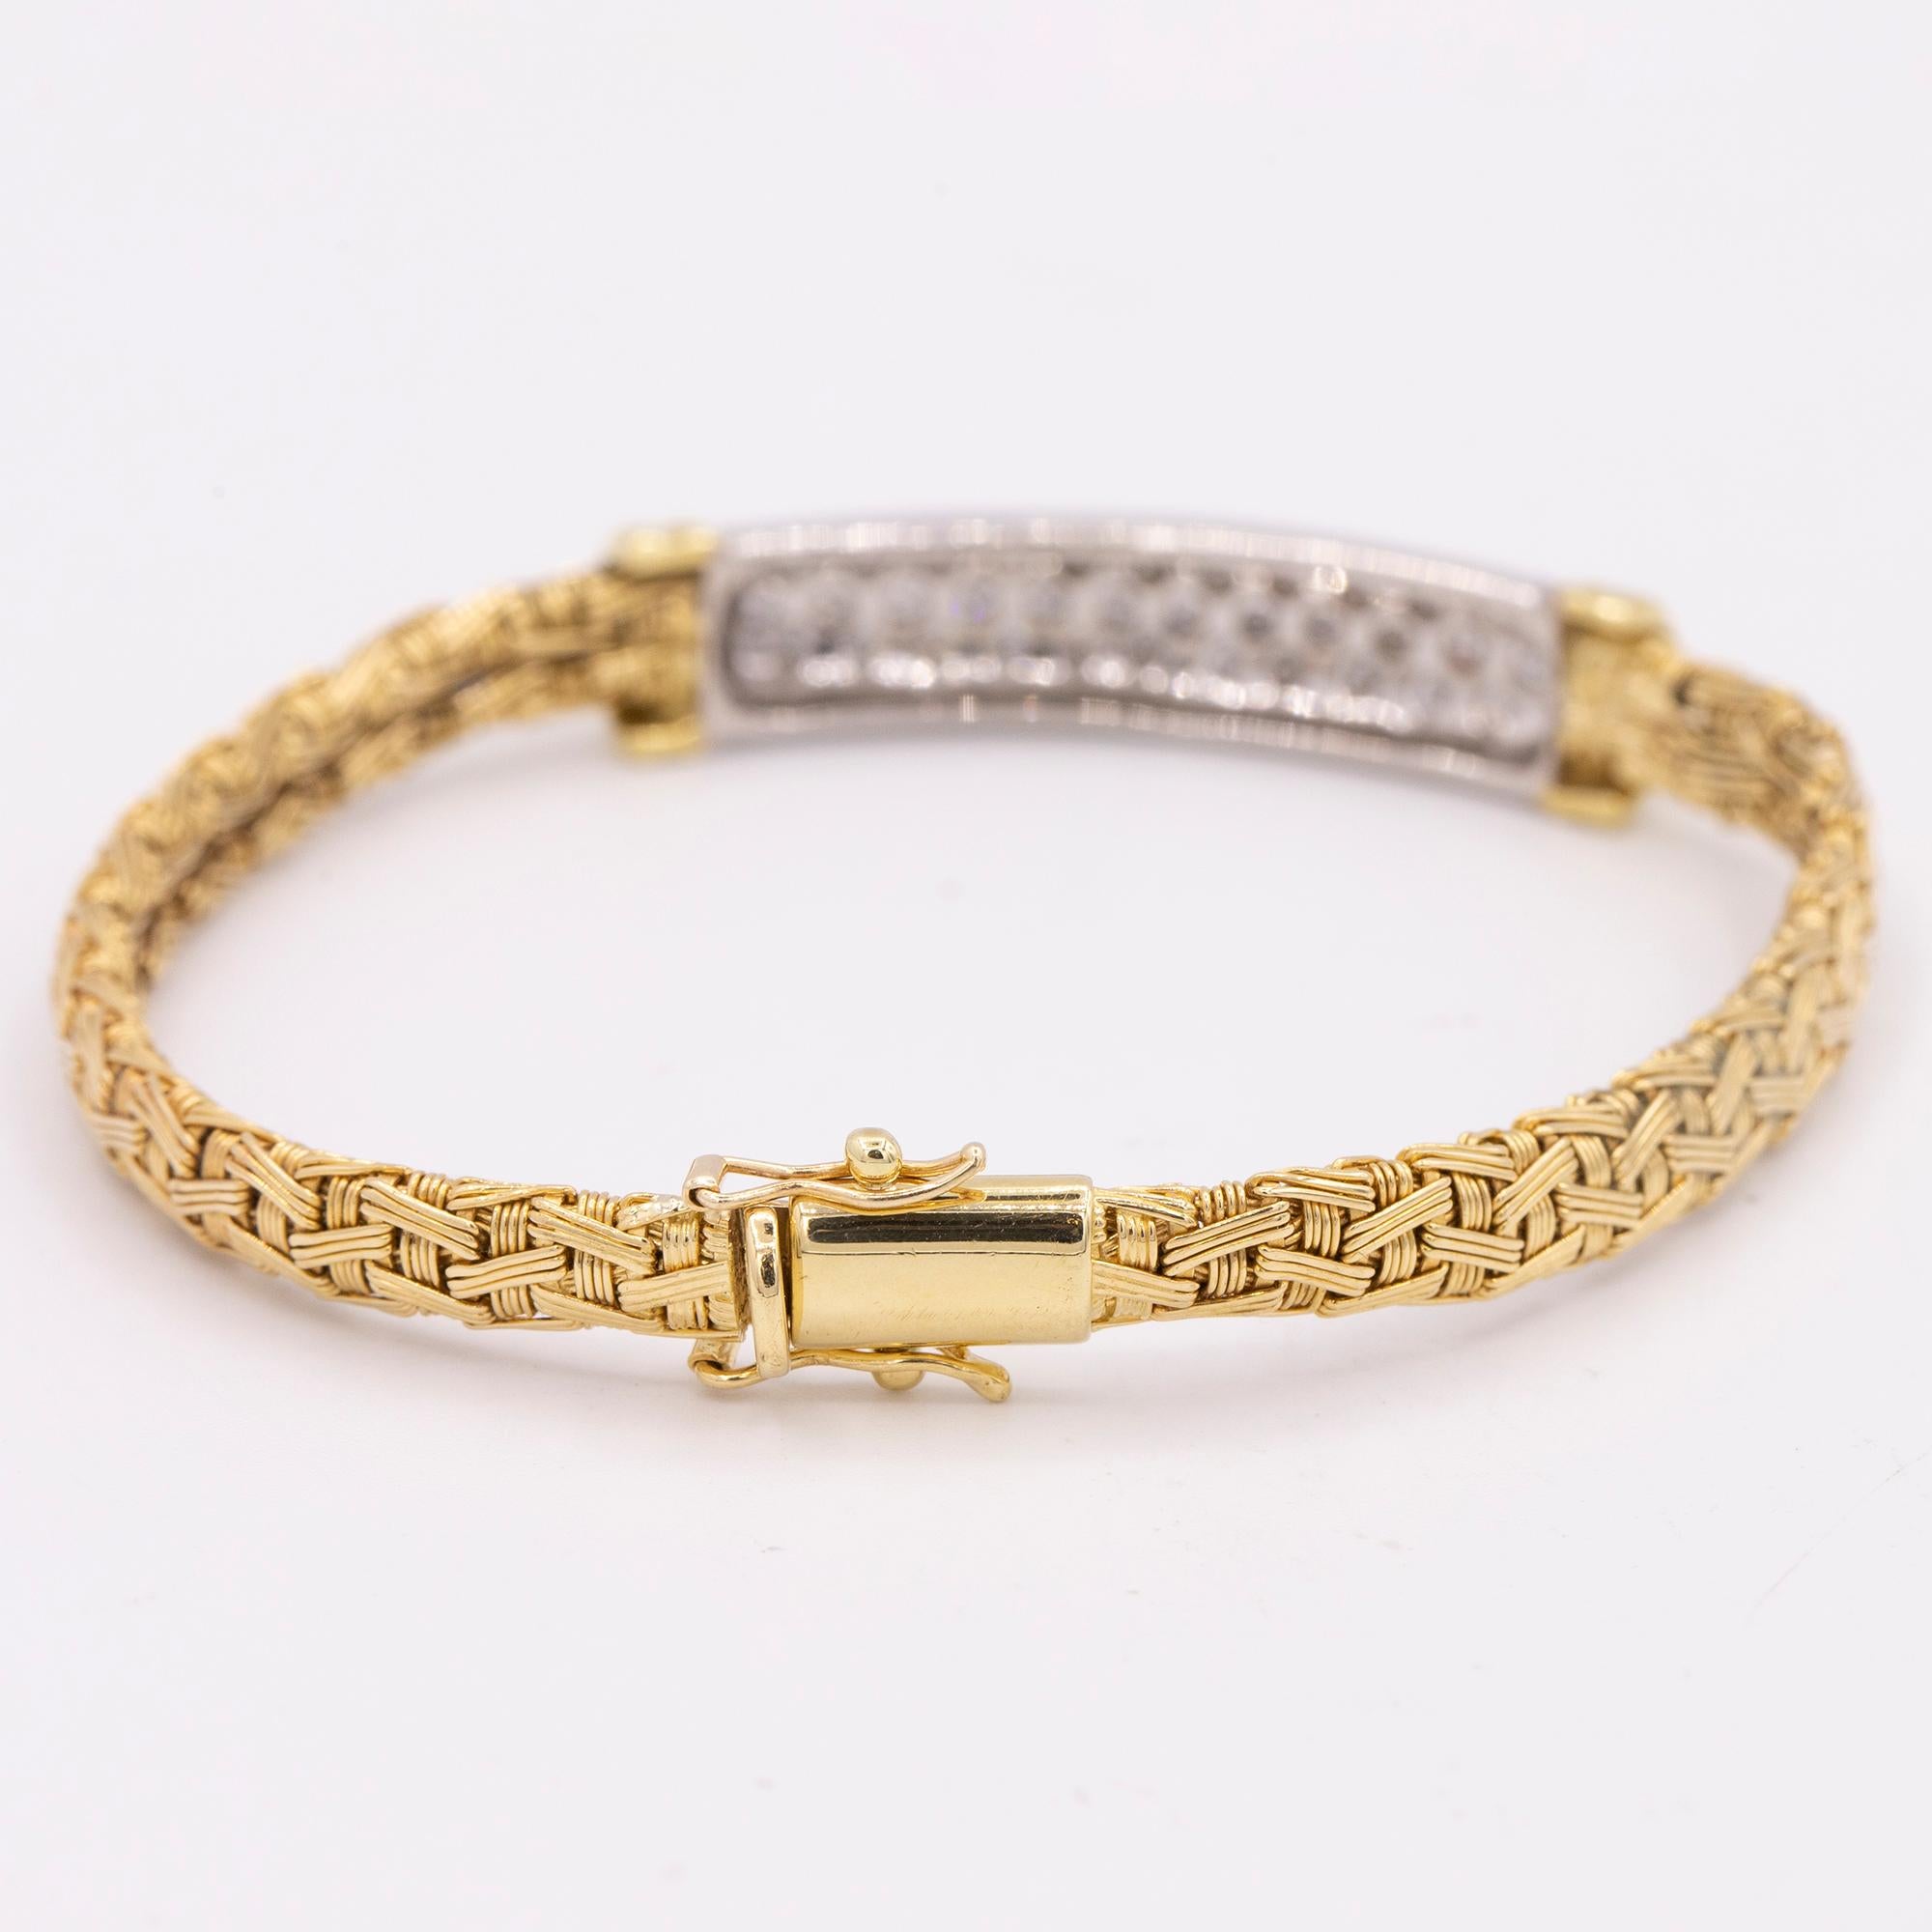 Vintage 18kt Yellow Gold bracelet featuring 34 round brilliant diamonds weighing approximately 1.00 carats in total weight. The diamonds are G - H in color & SI in clarity. The bracelet has a woven yellow gold bracelet with diamonds set in the